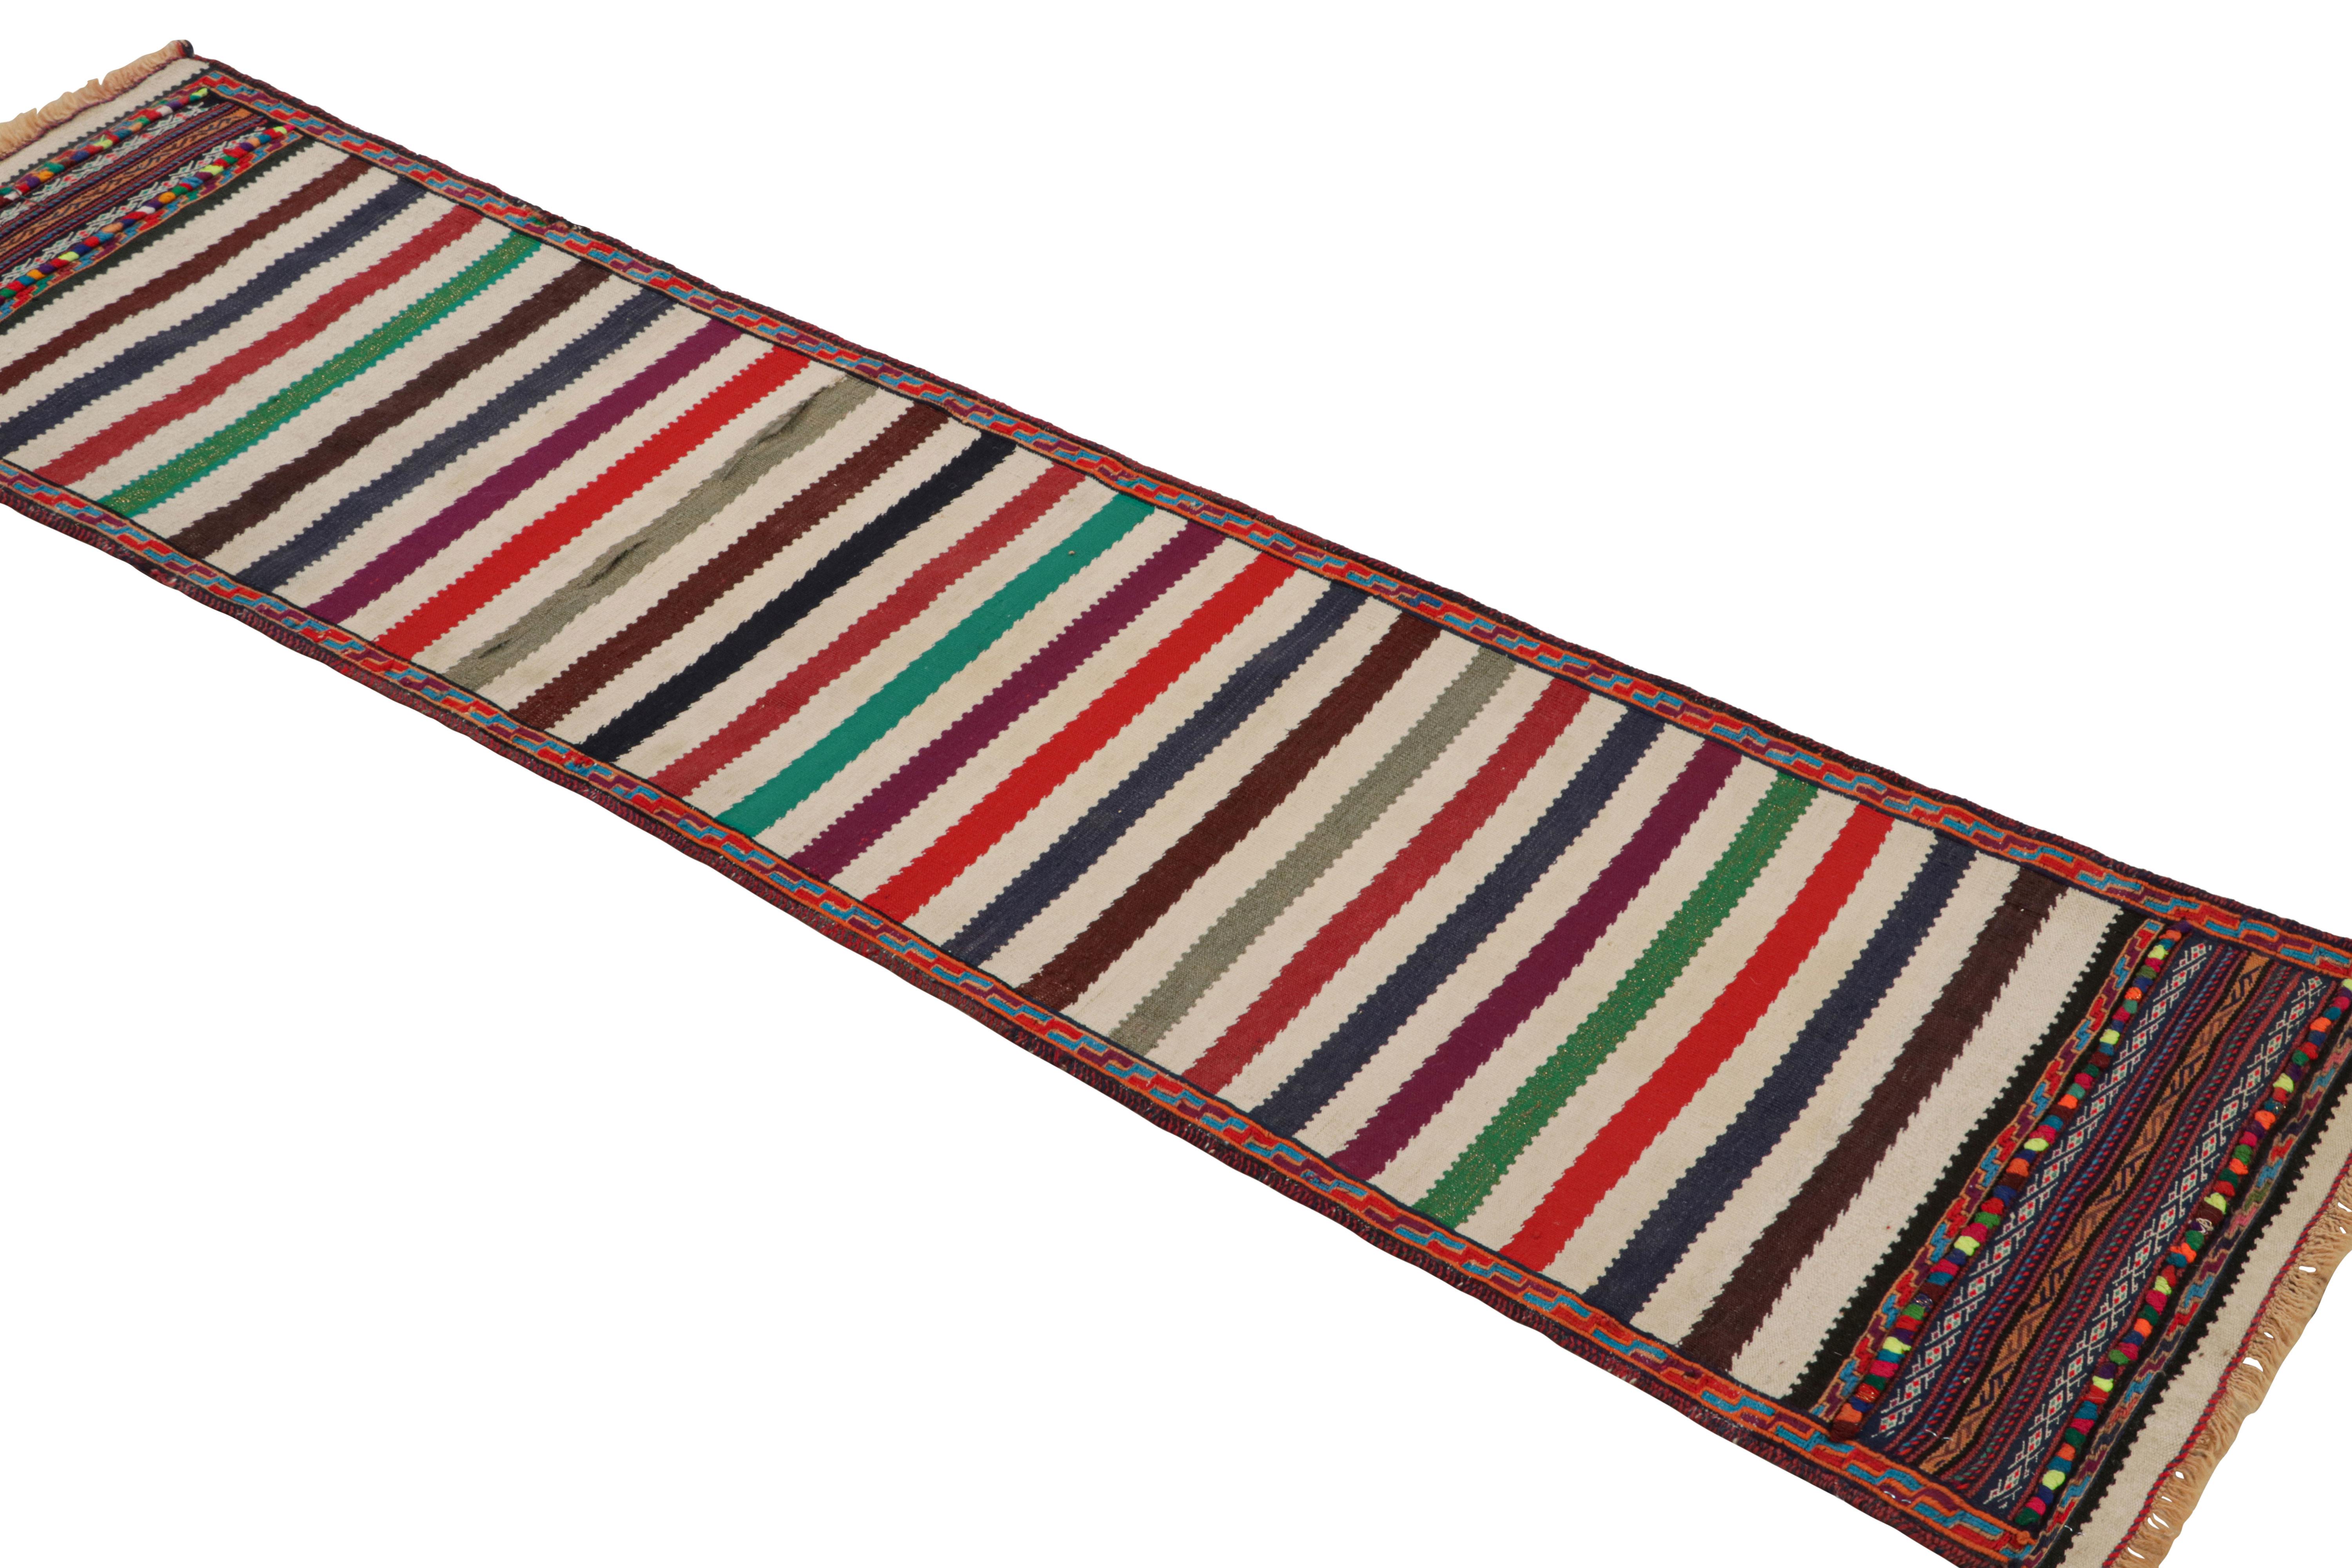 Handwoven in wool, this 1x6 vintage Afghan kilim runner rug originates circa 1950-1960—a tribal curation among new additions to the Rug & Kilim collection.

On the Design:

A polychromatic colorway with both rich and vibrant hues underscores both